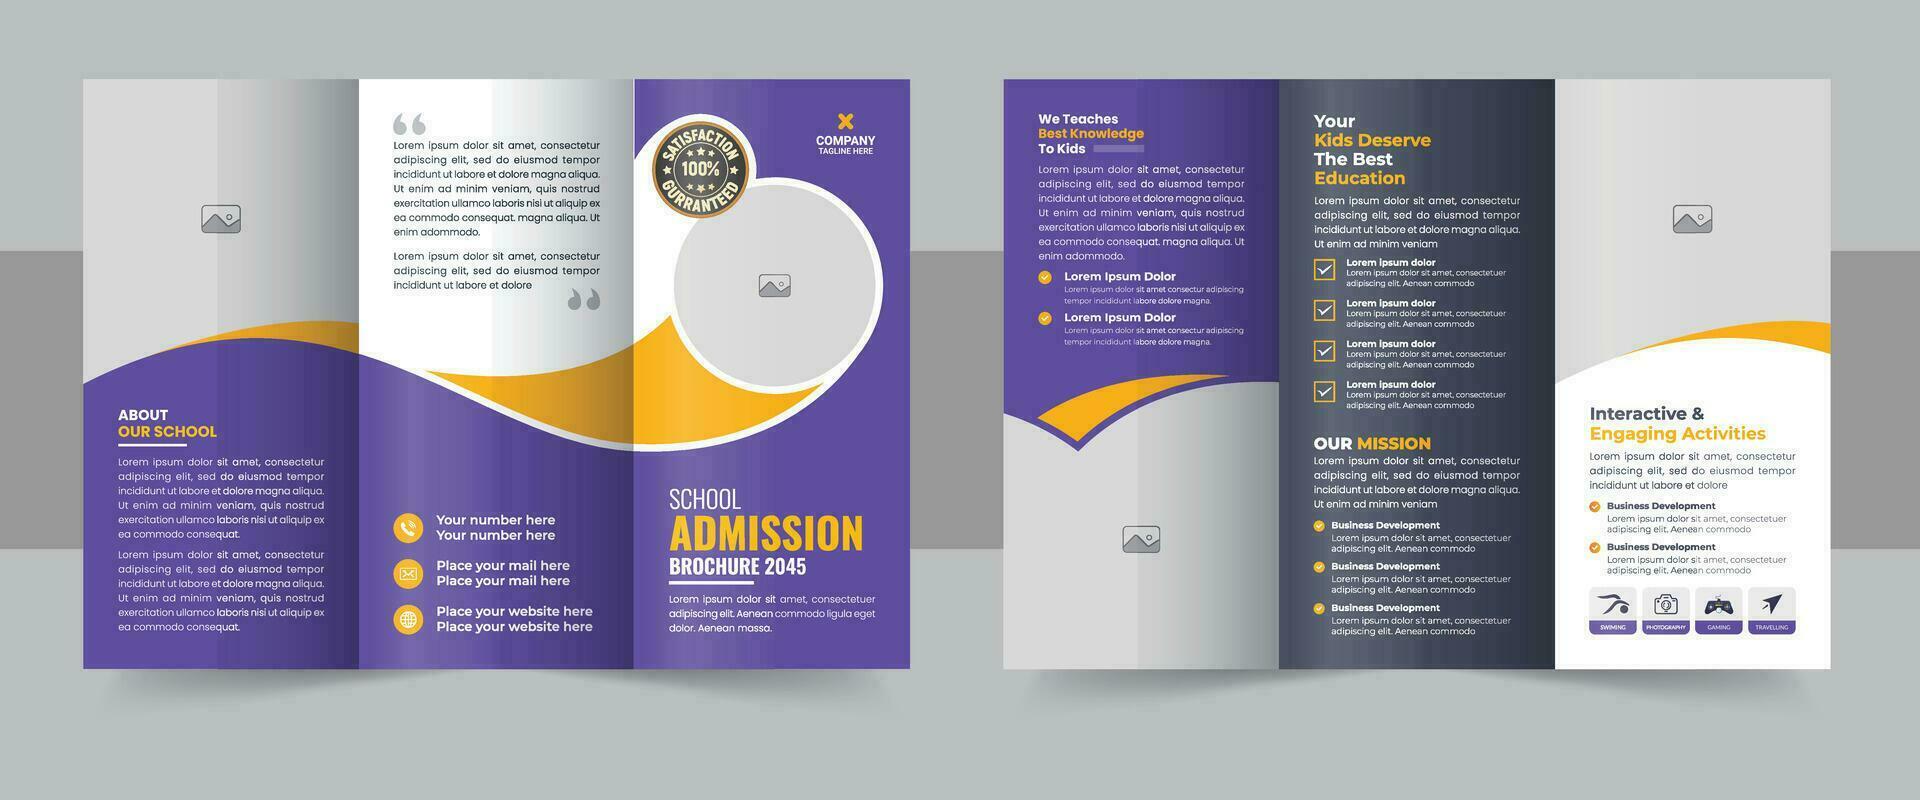 Kids school admission trifold brochure template, school trifold brochure design, back to school admission trifold brochure design template or Corporate trifold brochure layout vector